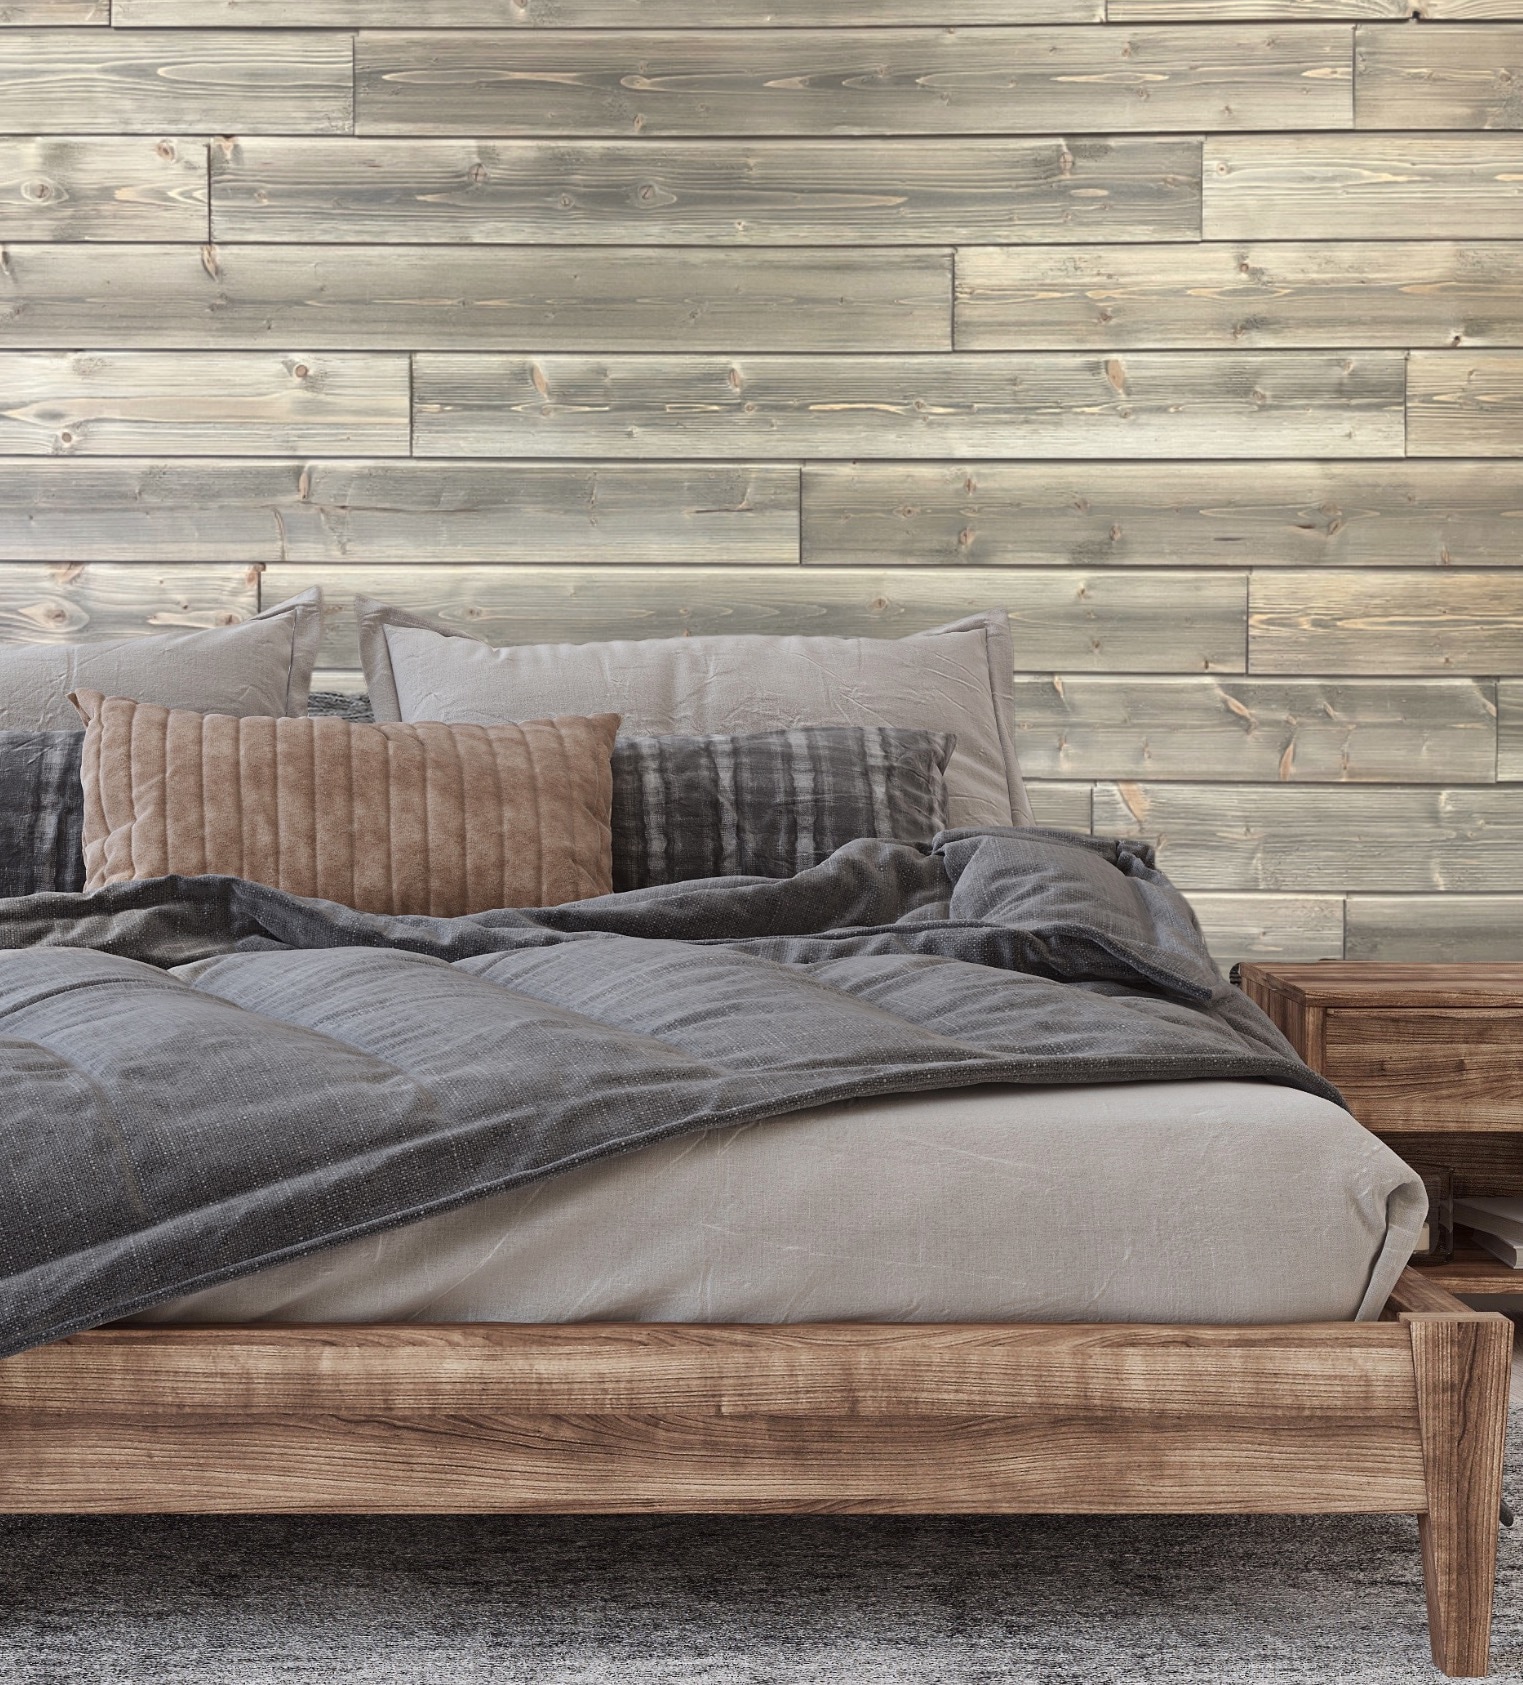 Style Selections Weathered Grey Pine Wood Shiplap Wall Plank Kit (Coverage Area: 10.5-sq ft) in Gray | 51005